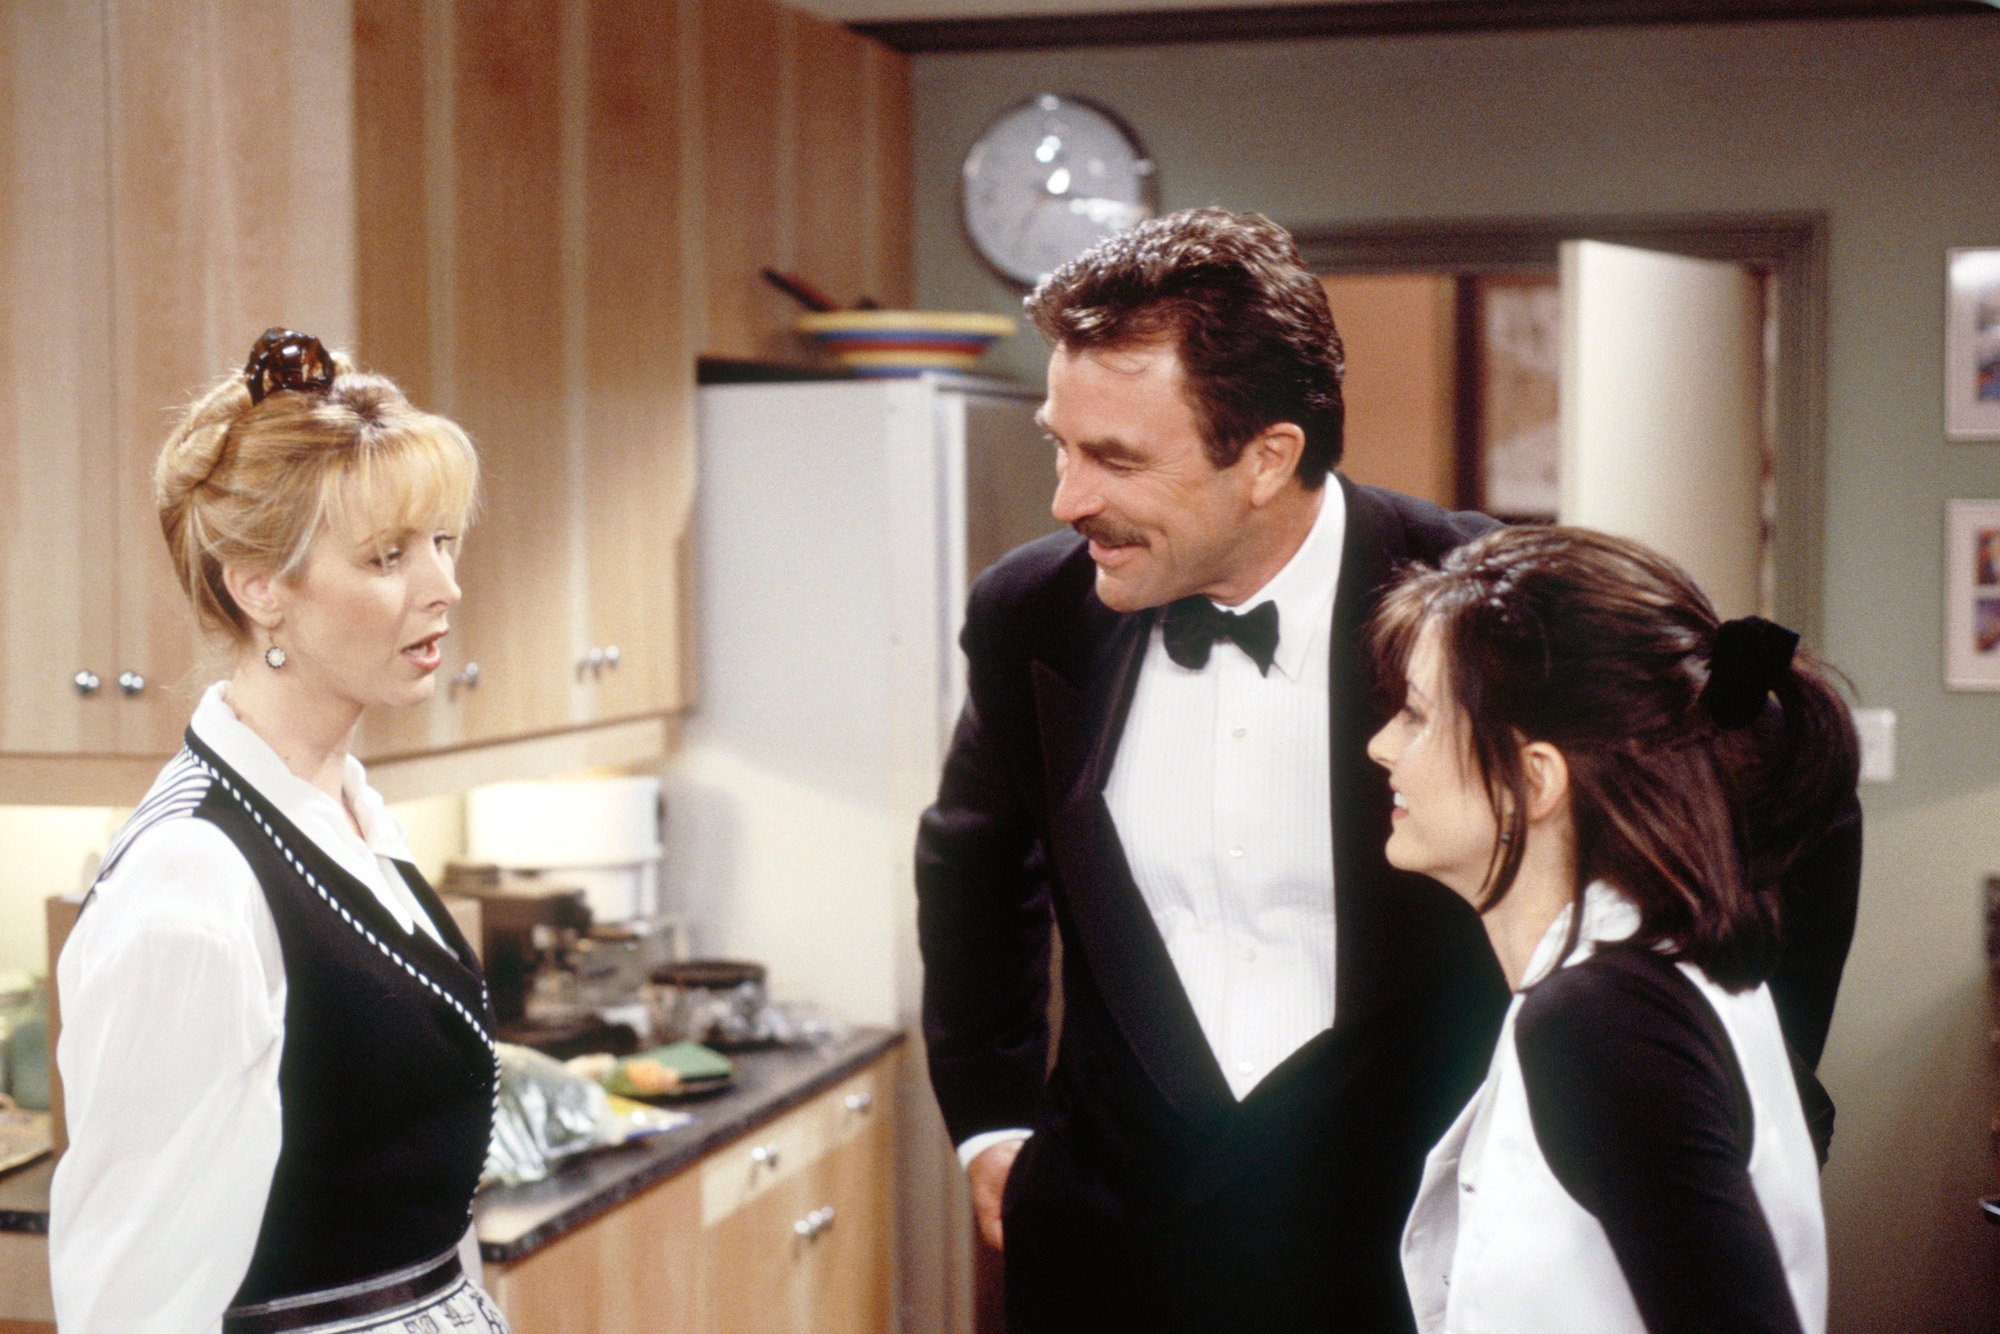 'Friends' guest star Tom Selleck joins Courteney Cox and Lisa Kudrow in the kitchen